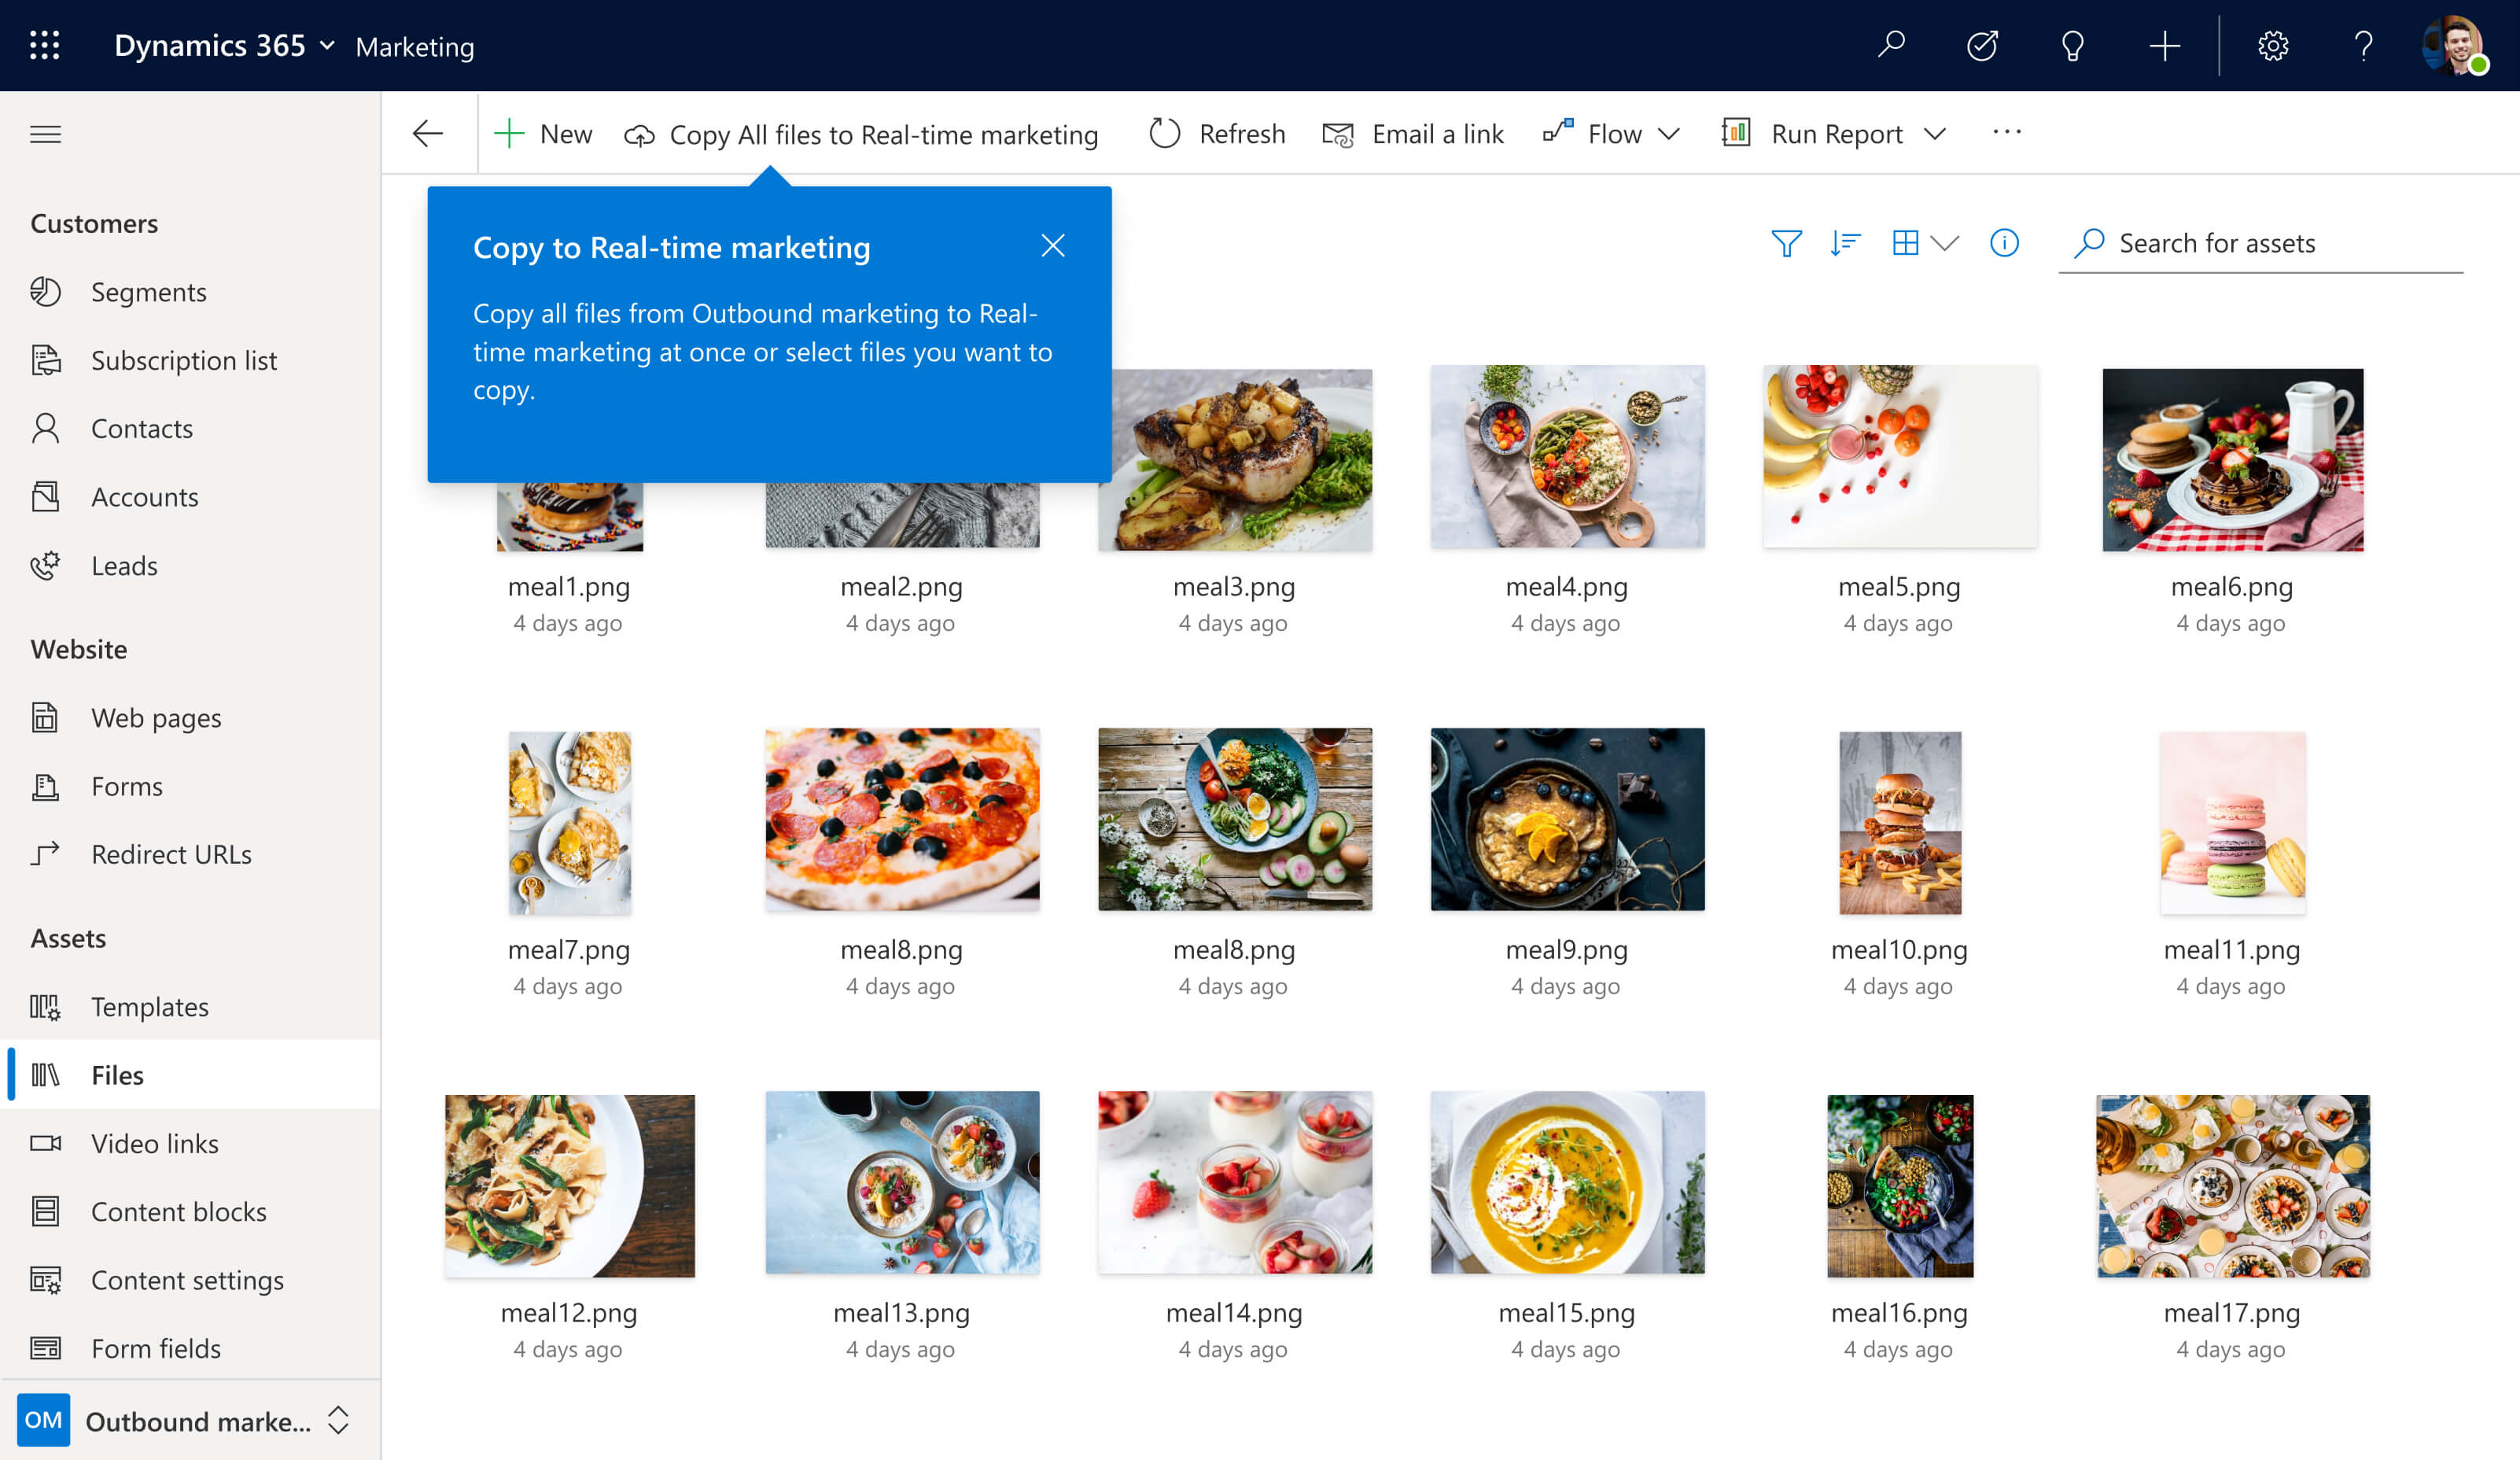 2021 release plan wave 2 for Dynamics 365